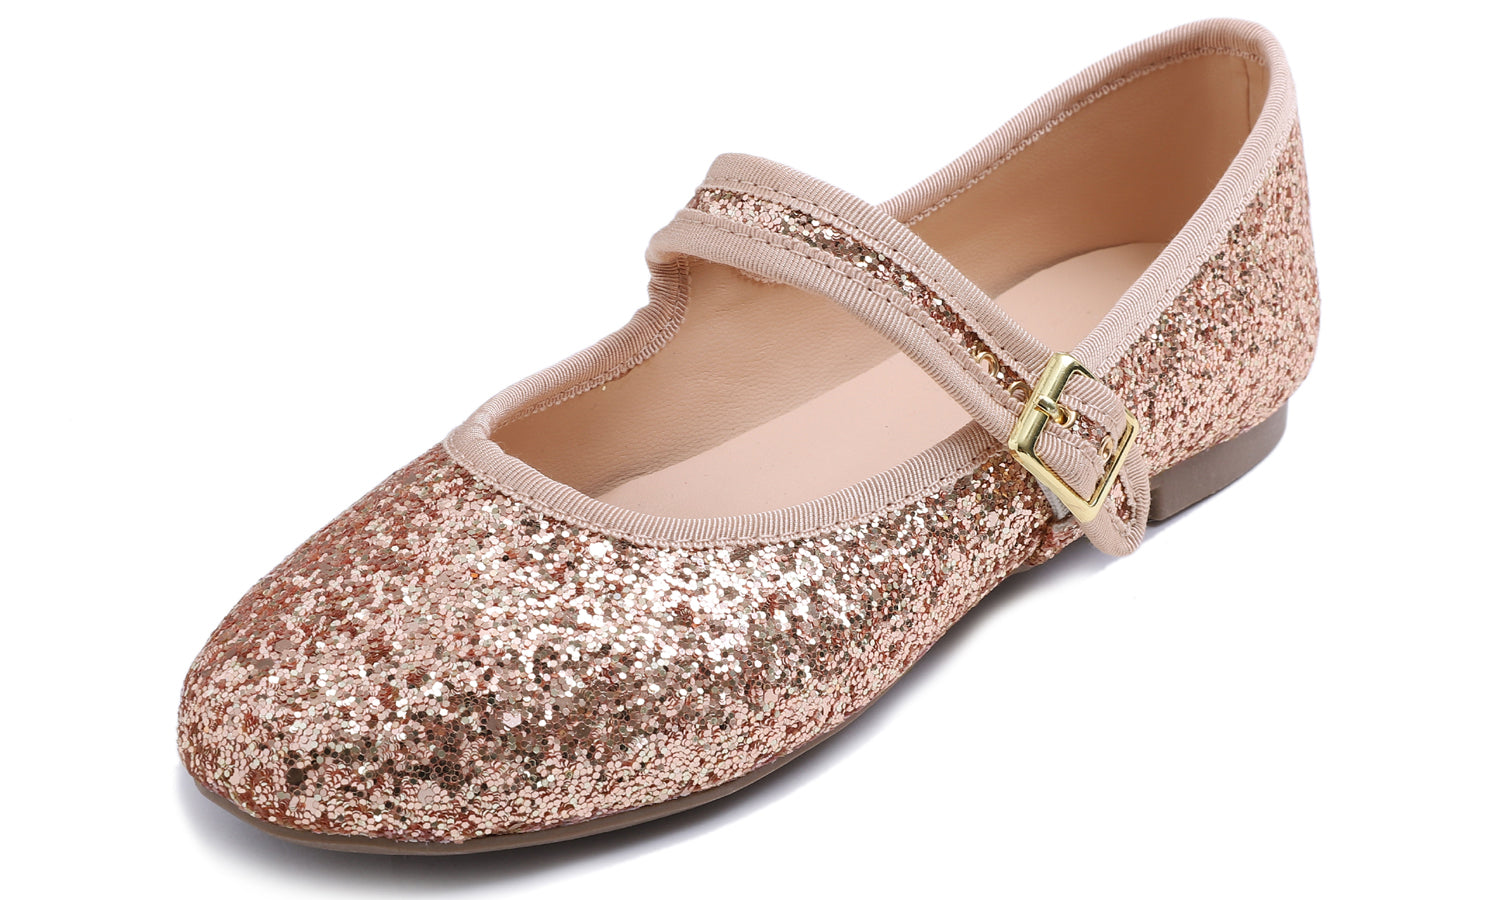 Feversole Women's Soft Cushion Extra Padded Comfort Round Toe Mary Jane Metal Buckle Fashion Ballet Flats Walking Shoes Rose Gold Glitter